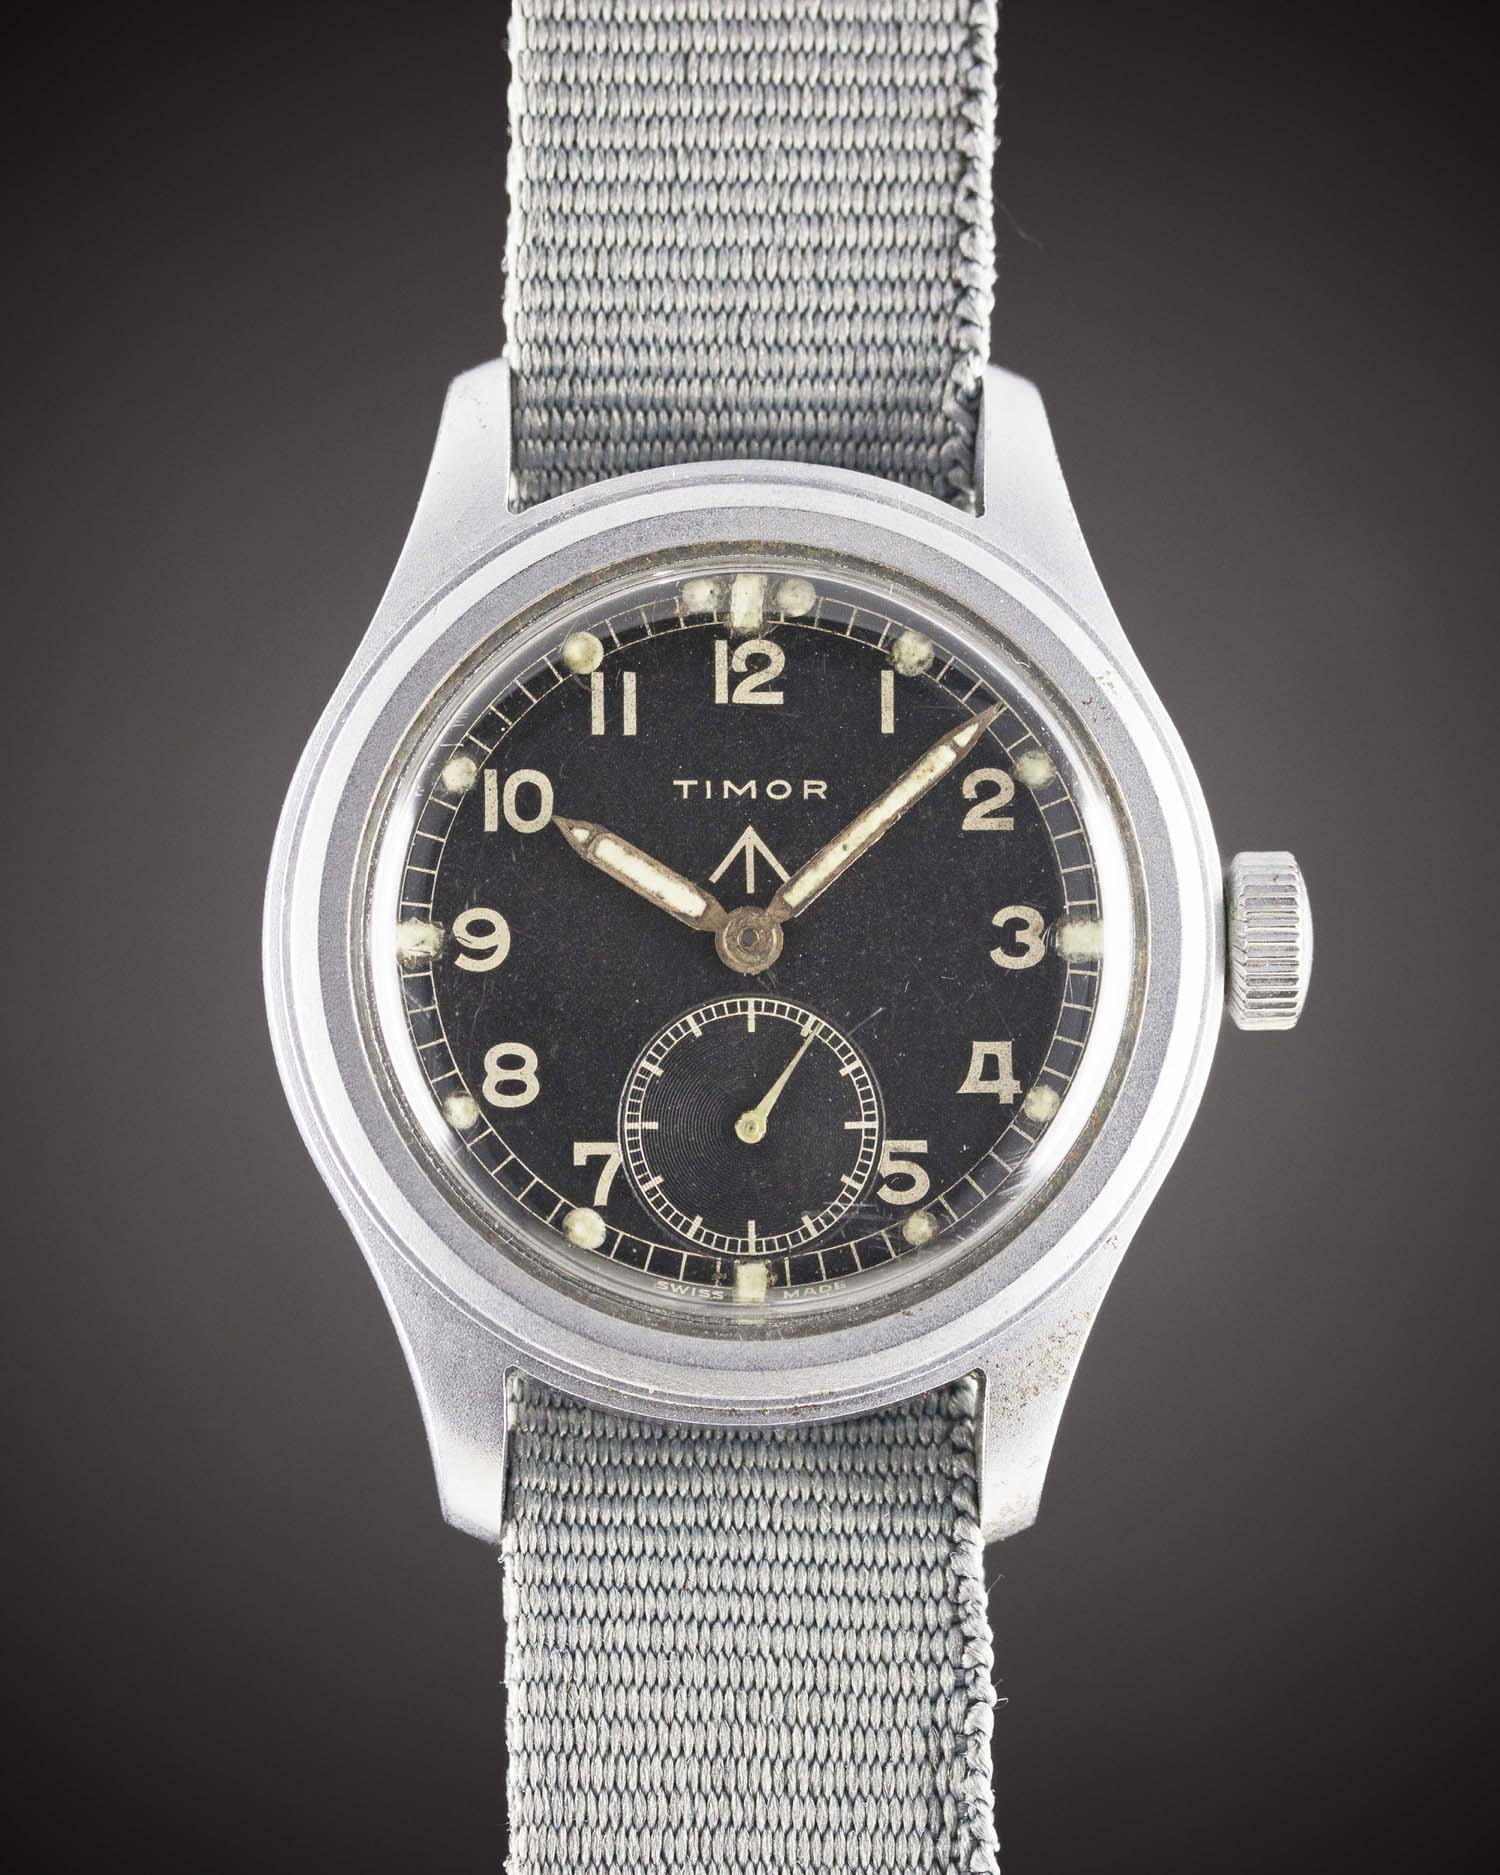 A GENTLEMAN'S STAINLESS STEEL BRITISH MILITARY TIMOR W.W.W. WRIST WATCH CIRCA 1940s, PART OF THE "